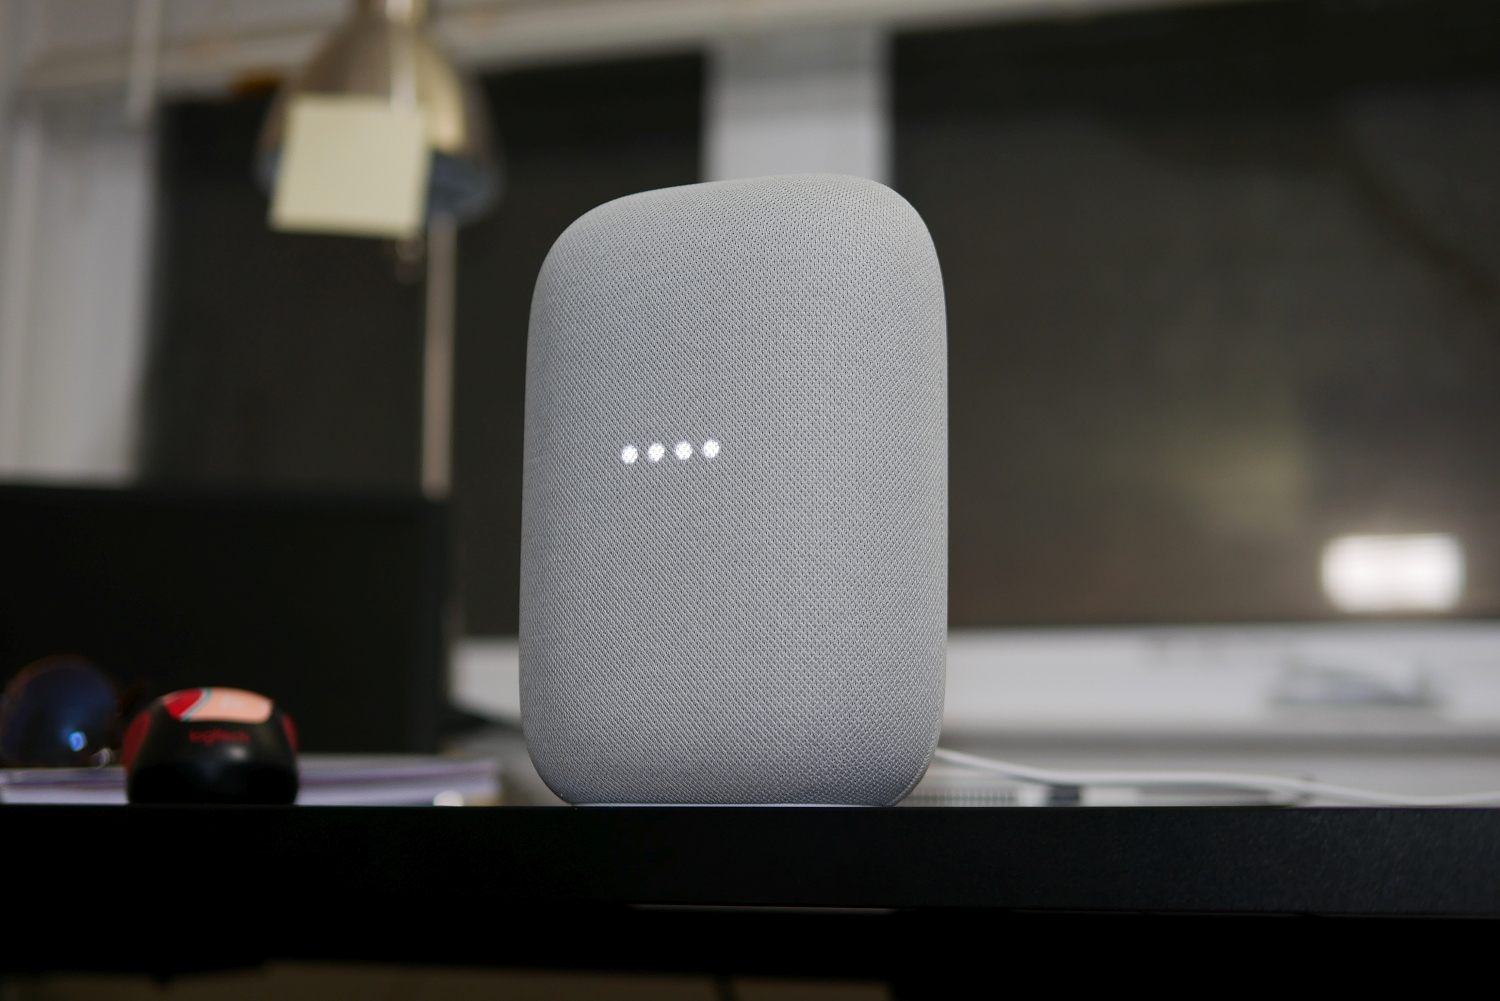 How to Set Up Your New Google Nest Speaker